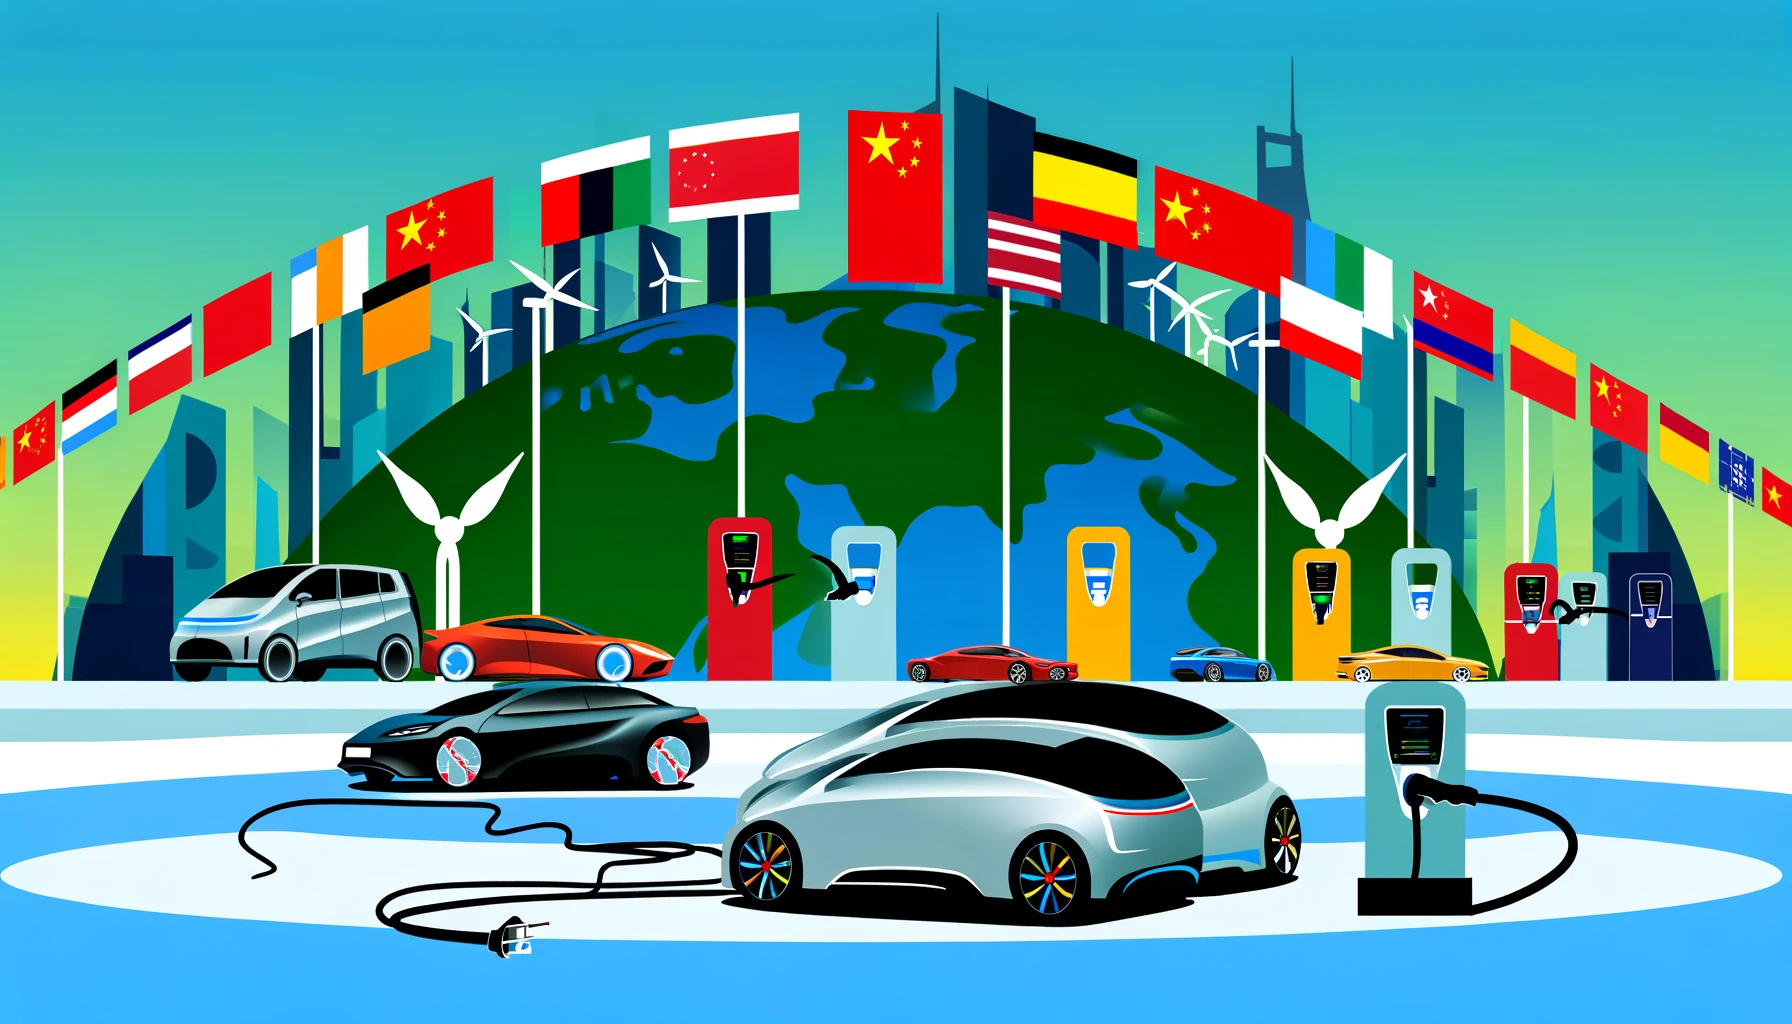 China’s car market, a competitive battleground, is central to the worldwide electric vehicle revolution.